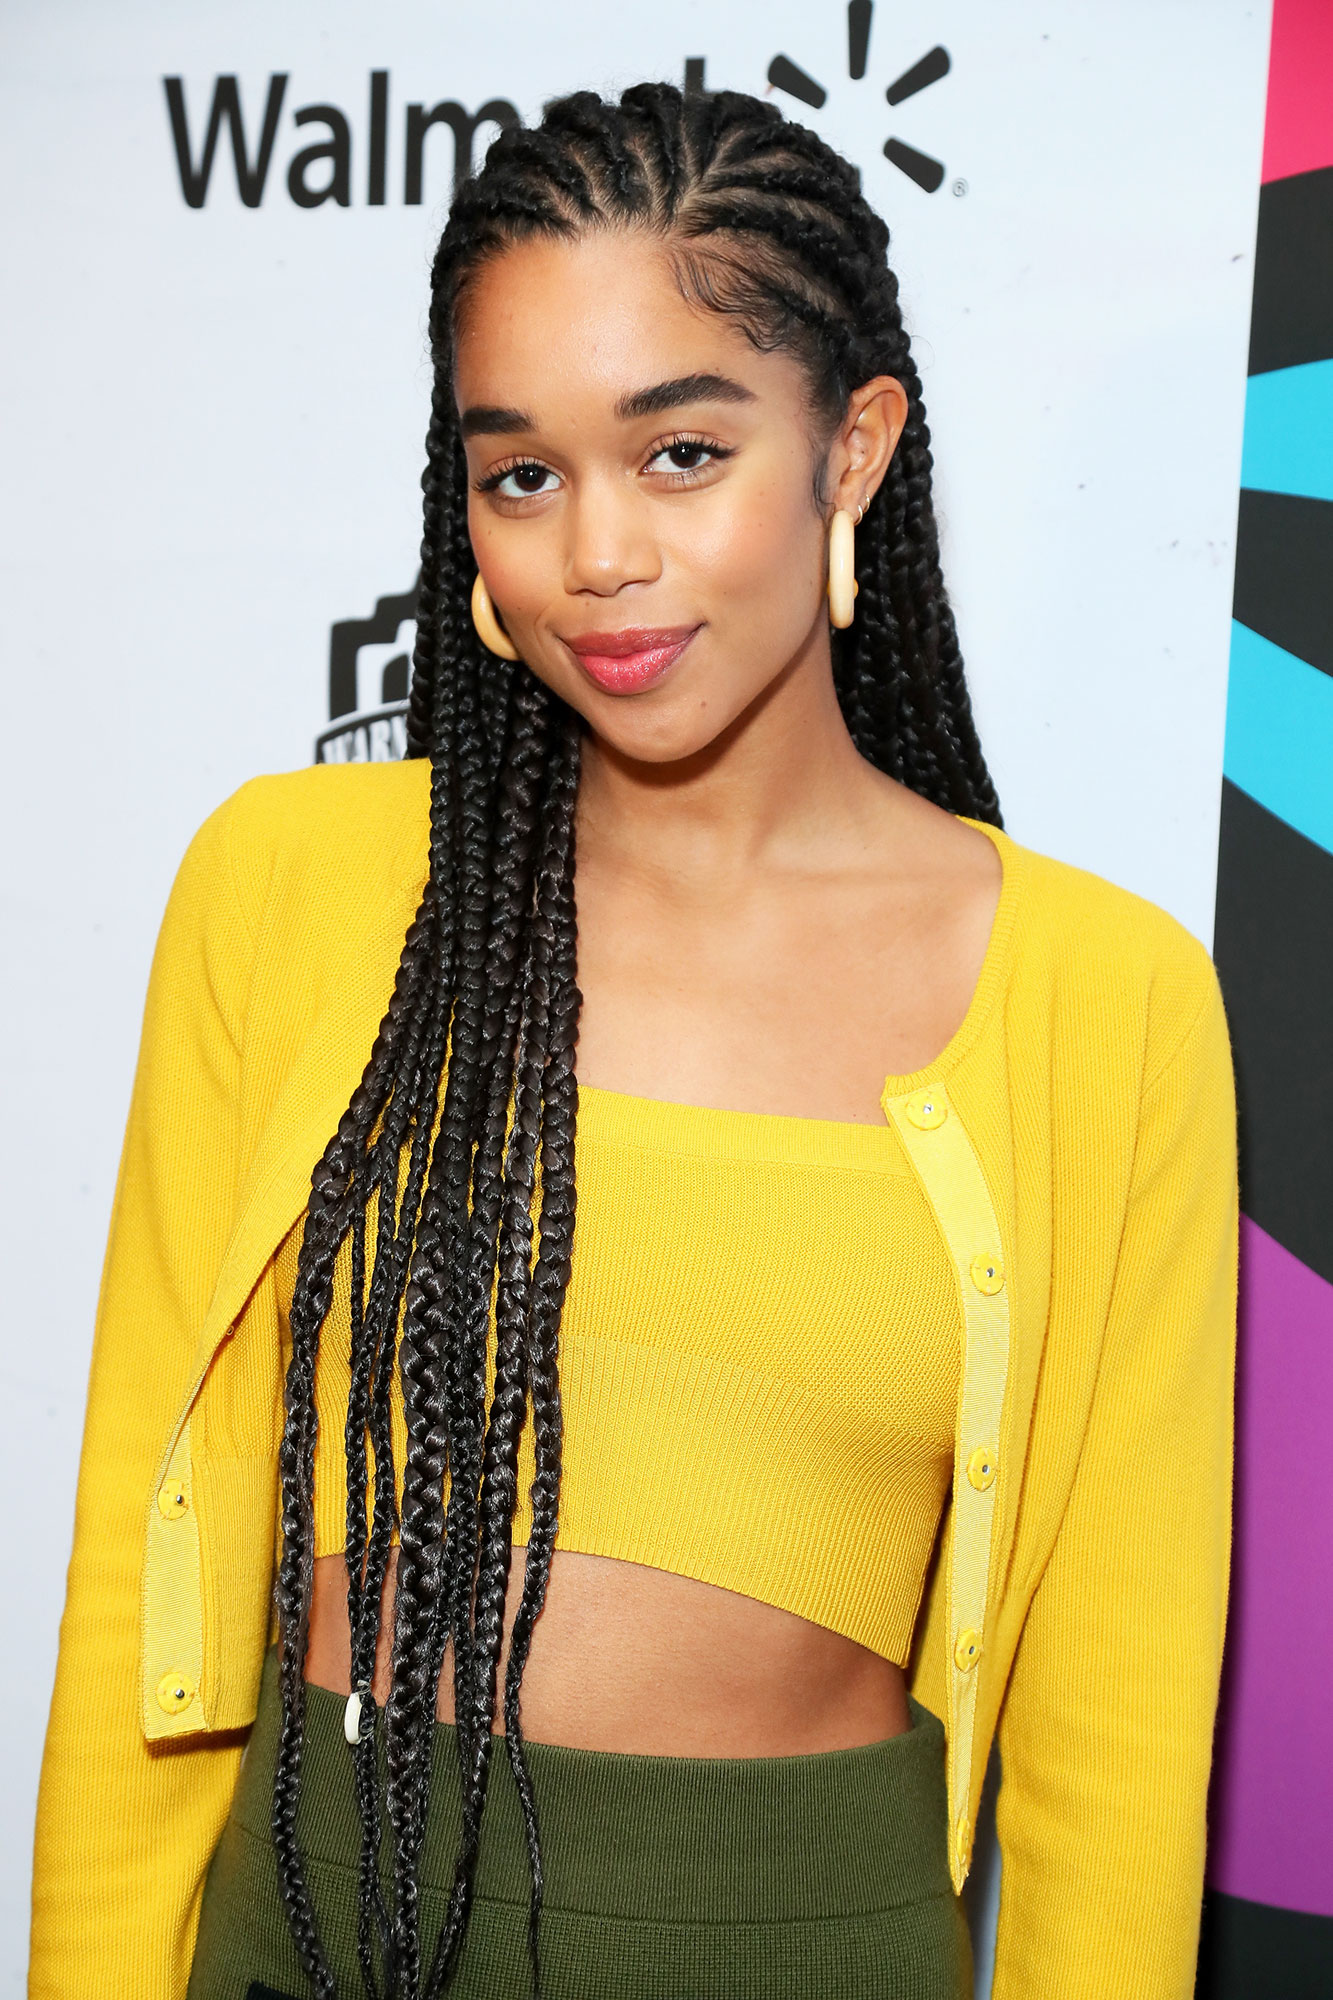 30 of the Top Black Celebrity Hairstyles  Hairstyle on Point